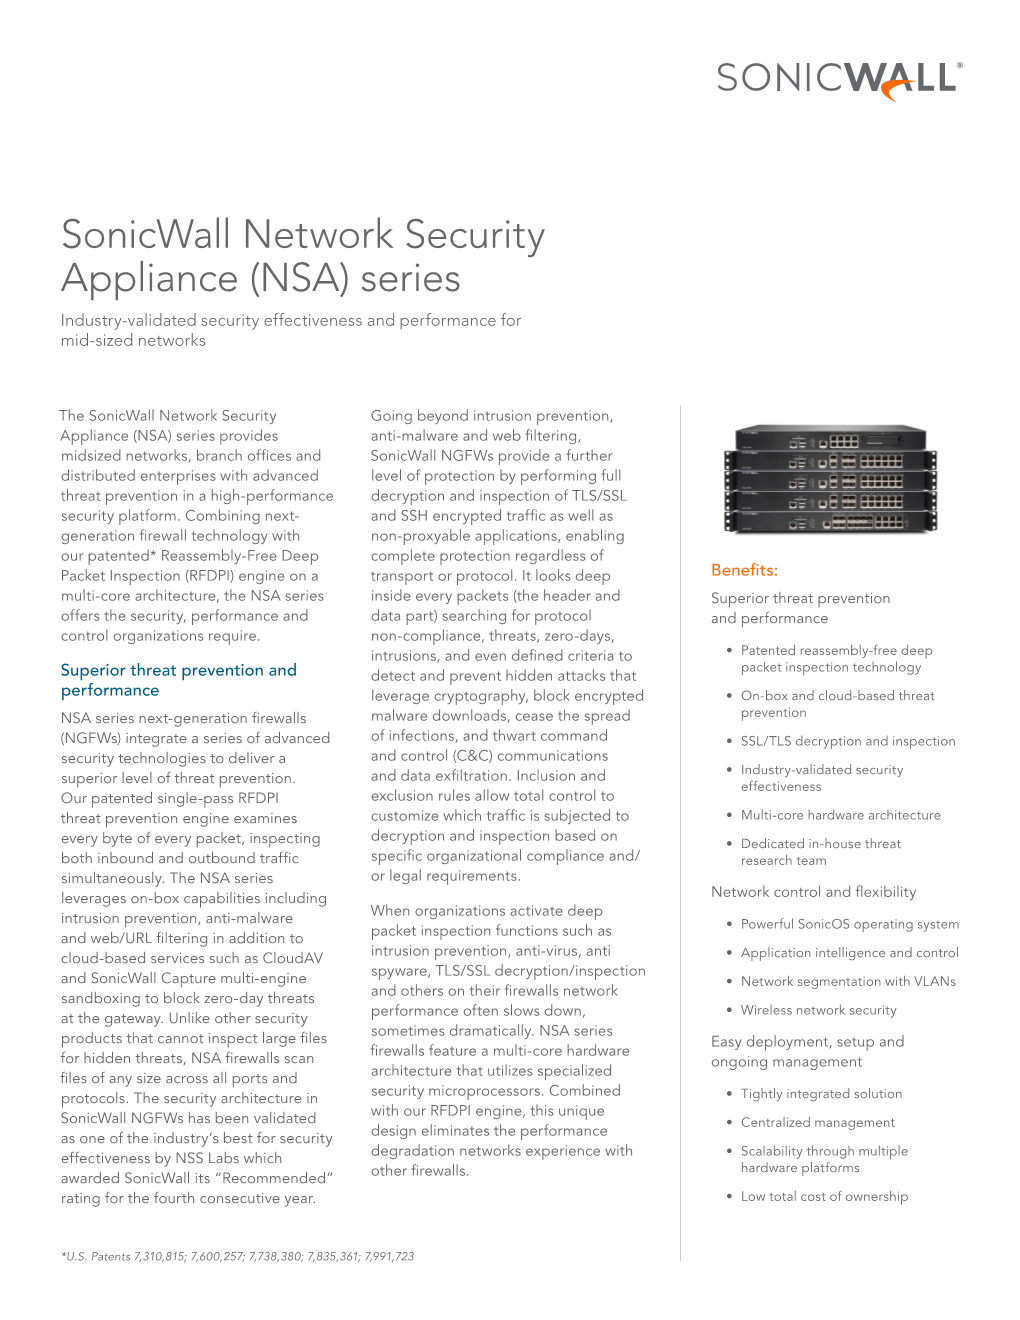 Sonicwall Network Security Appliance (NSA) Series Industry-Validated Security Effectiveness and Performance for Mid-Sized Networks